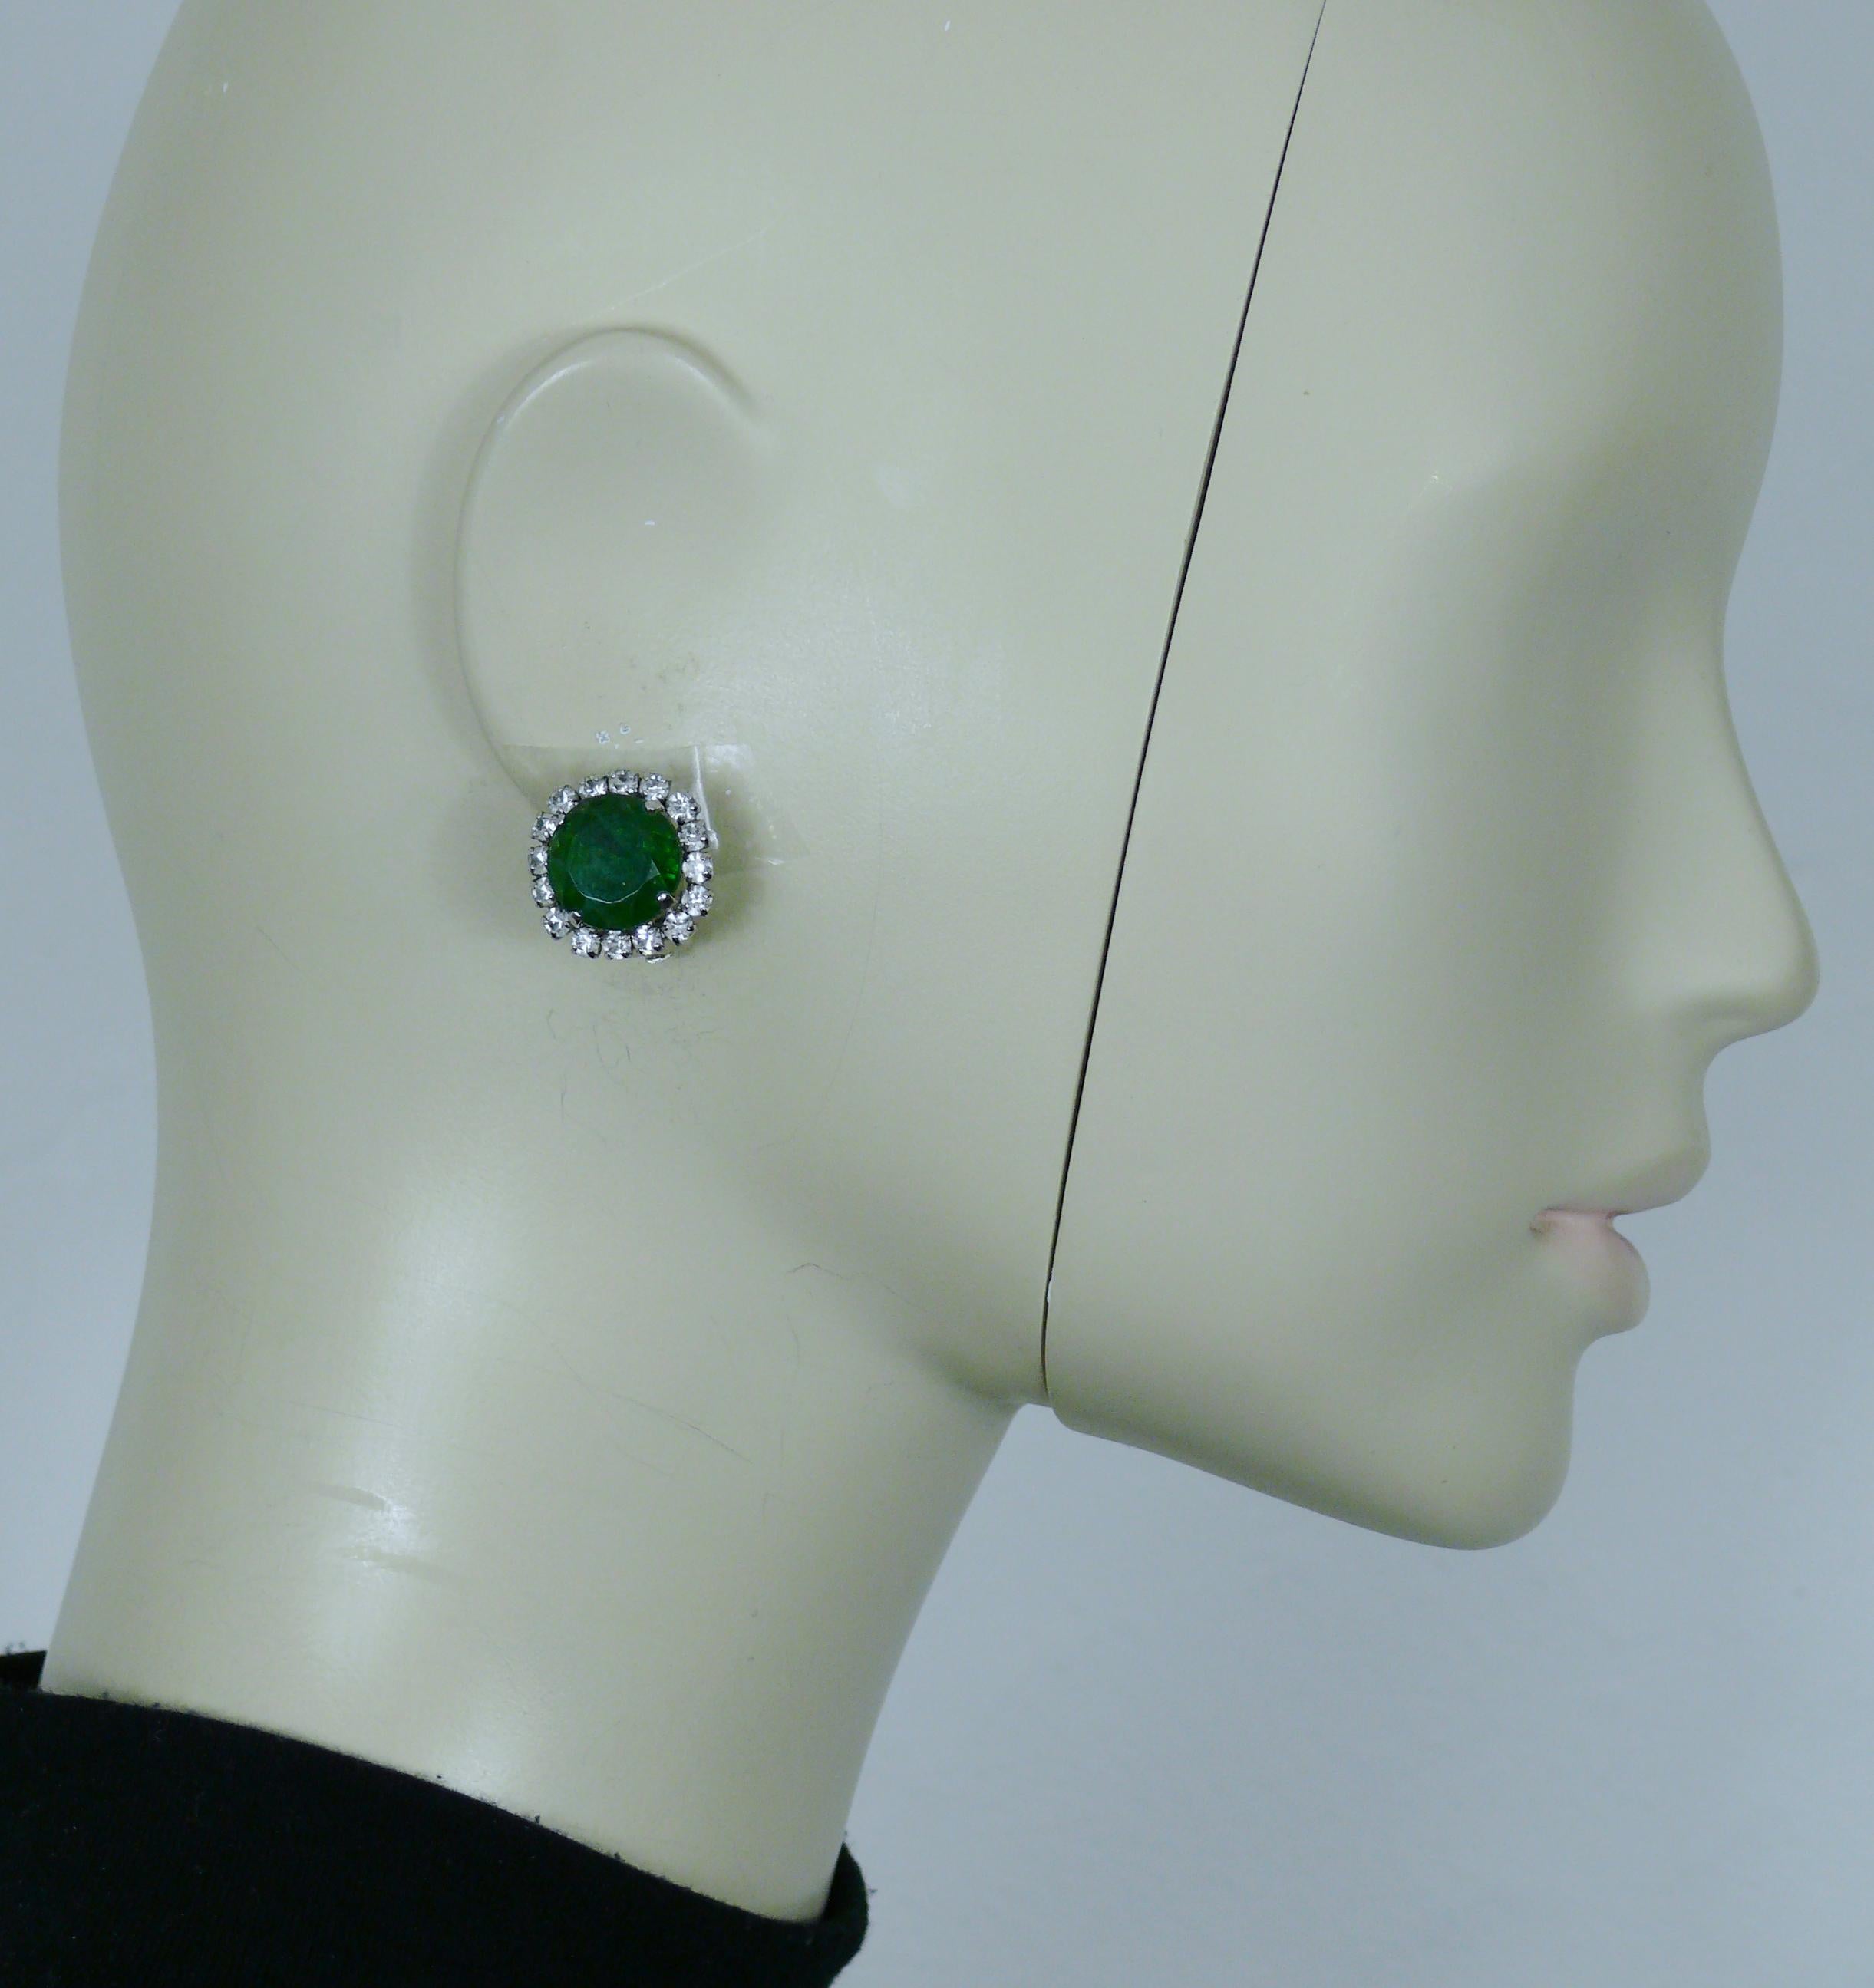 CHRISTIAN DIOR vintage silver tone clip-on earrings featuring a round emerald colour glass cabochon adorned with clear crystals.

Embossed 1970 CHR. DIOR Germany.

Indicative measurements : height approx. 2 cm (0.79 inch) / max width approx. 2 cm